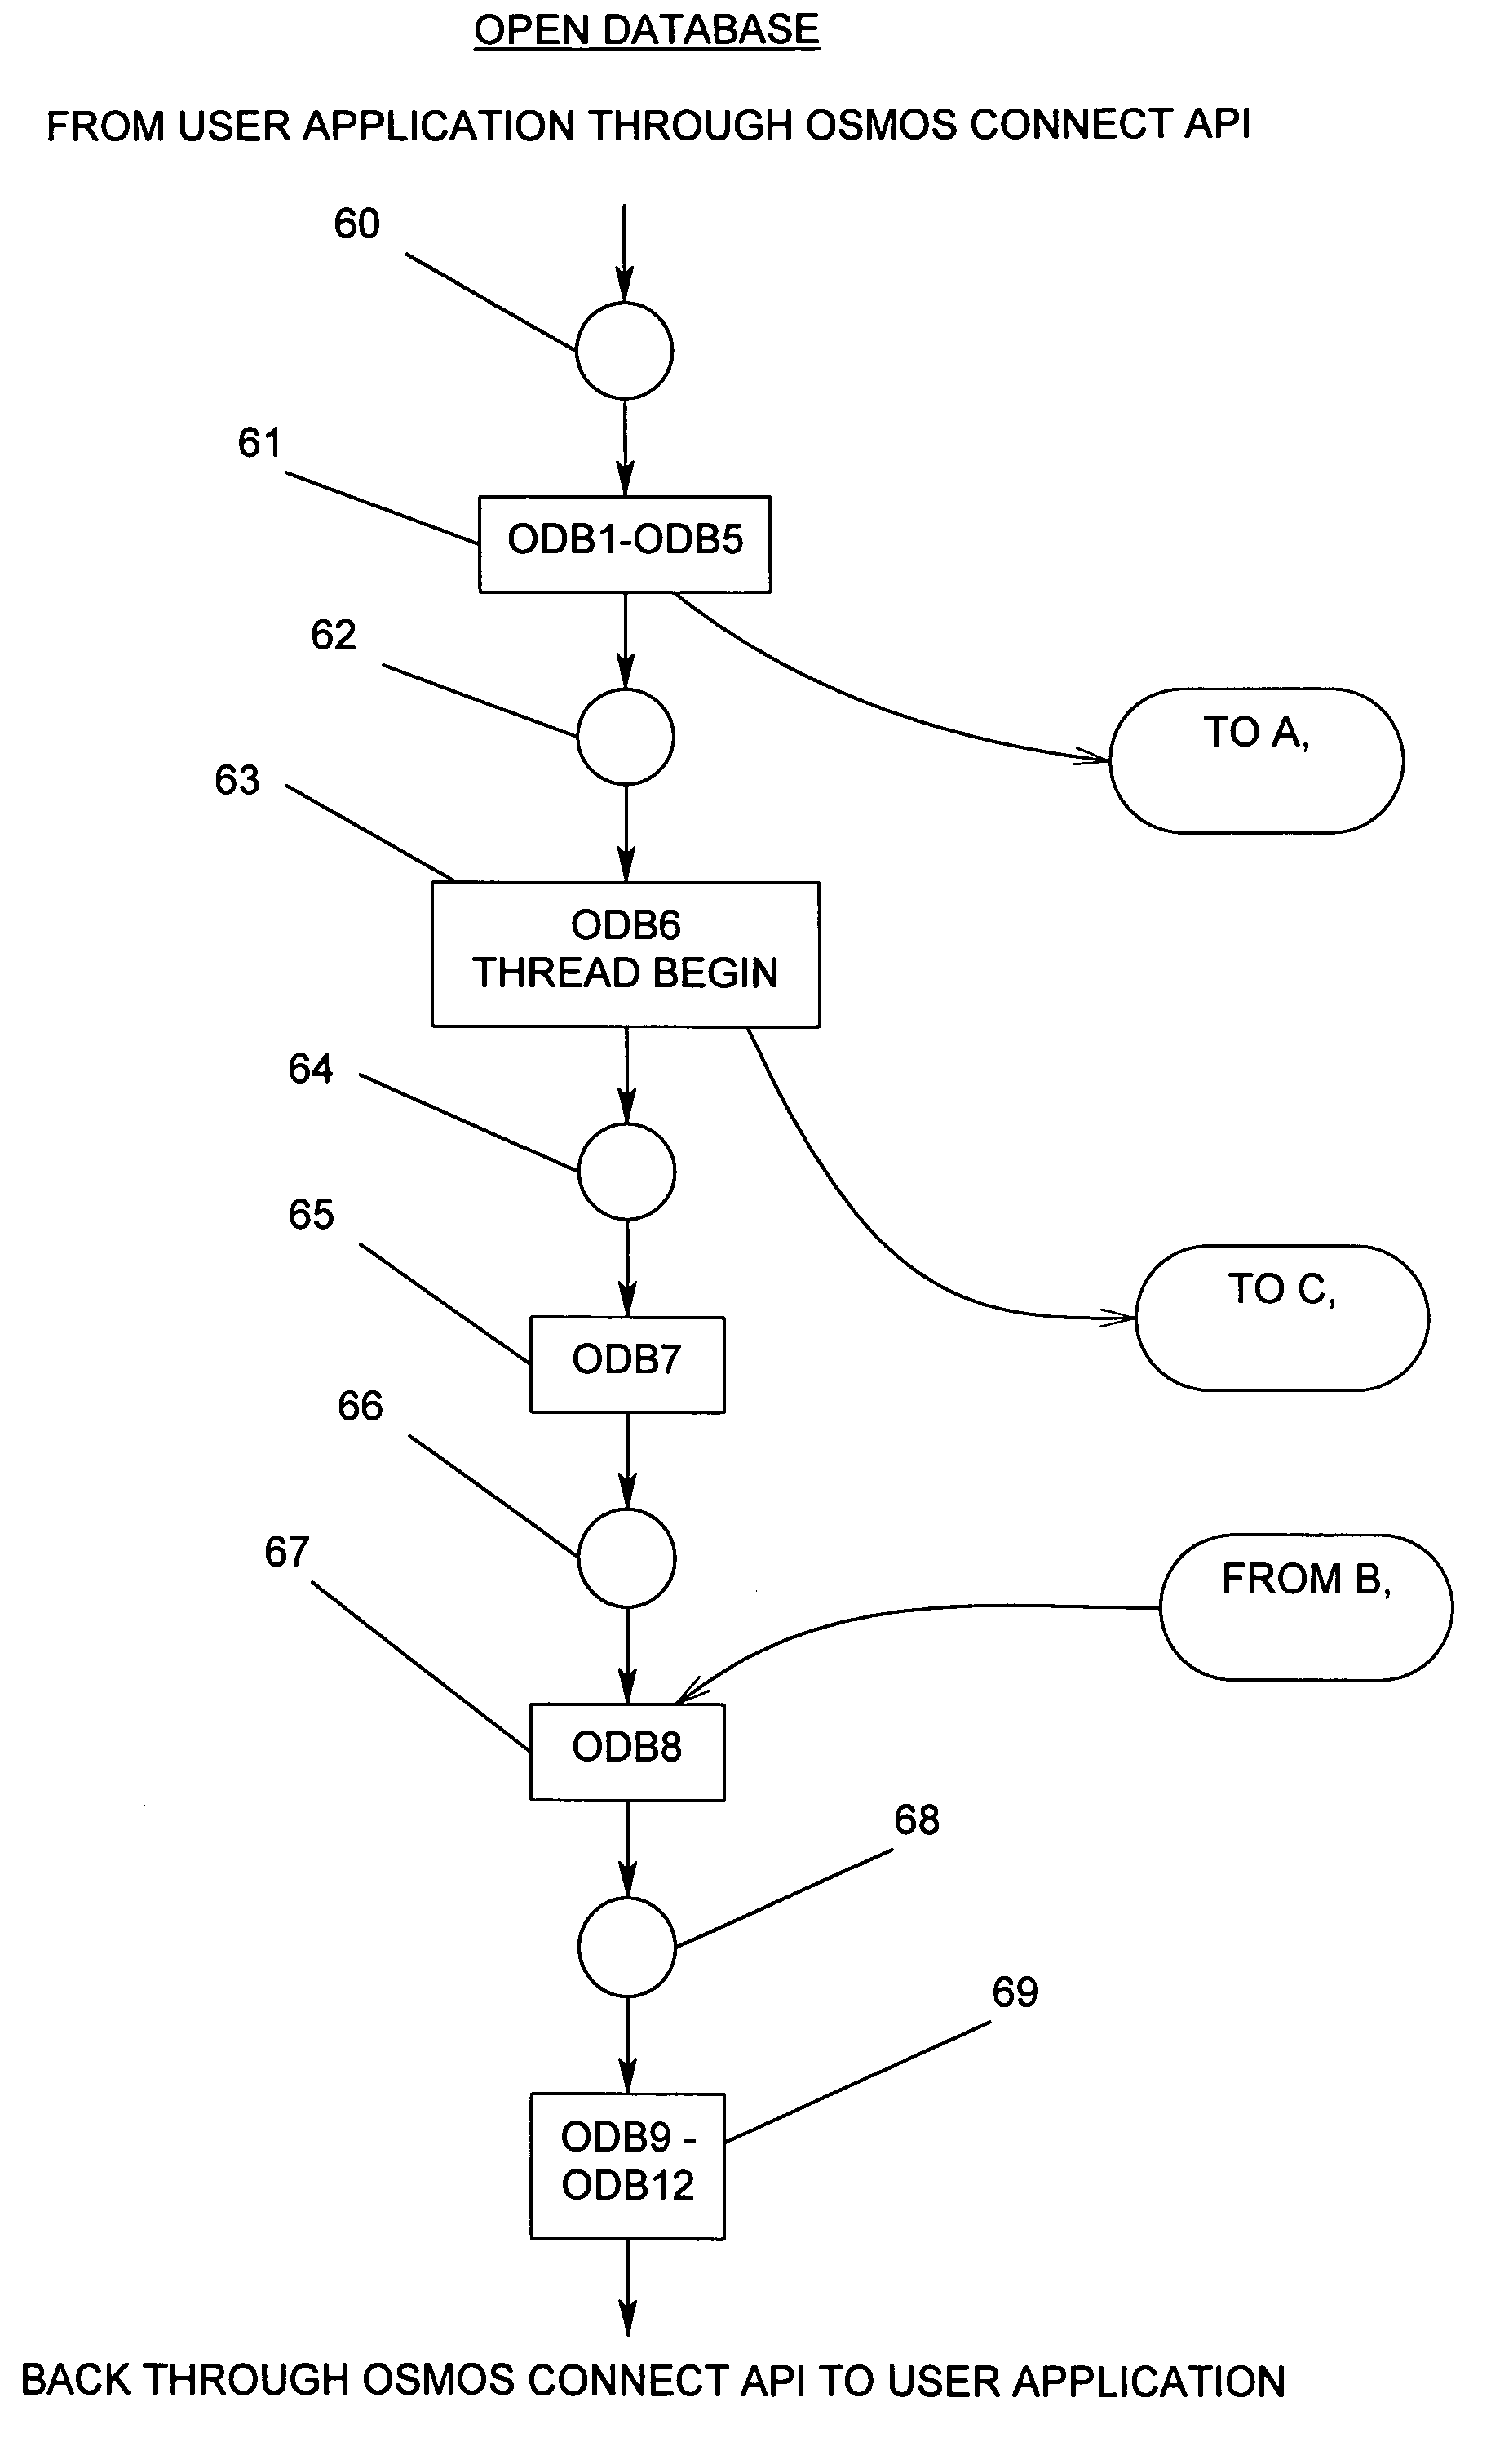 Method for generating unique object indentifiers in a data abstraction layer disposed between first and second DBMS software in response to parent thread performing client application